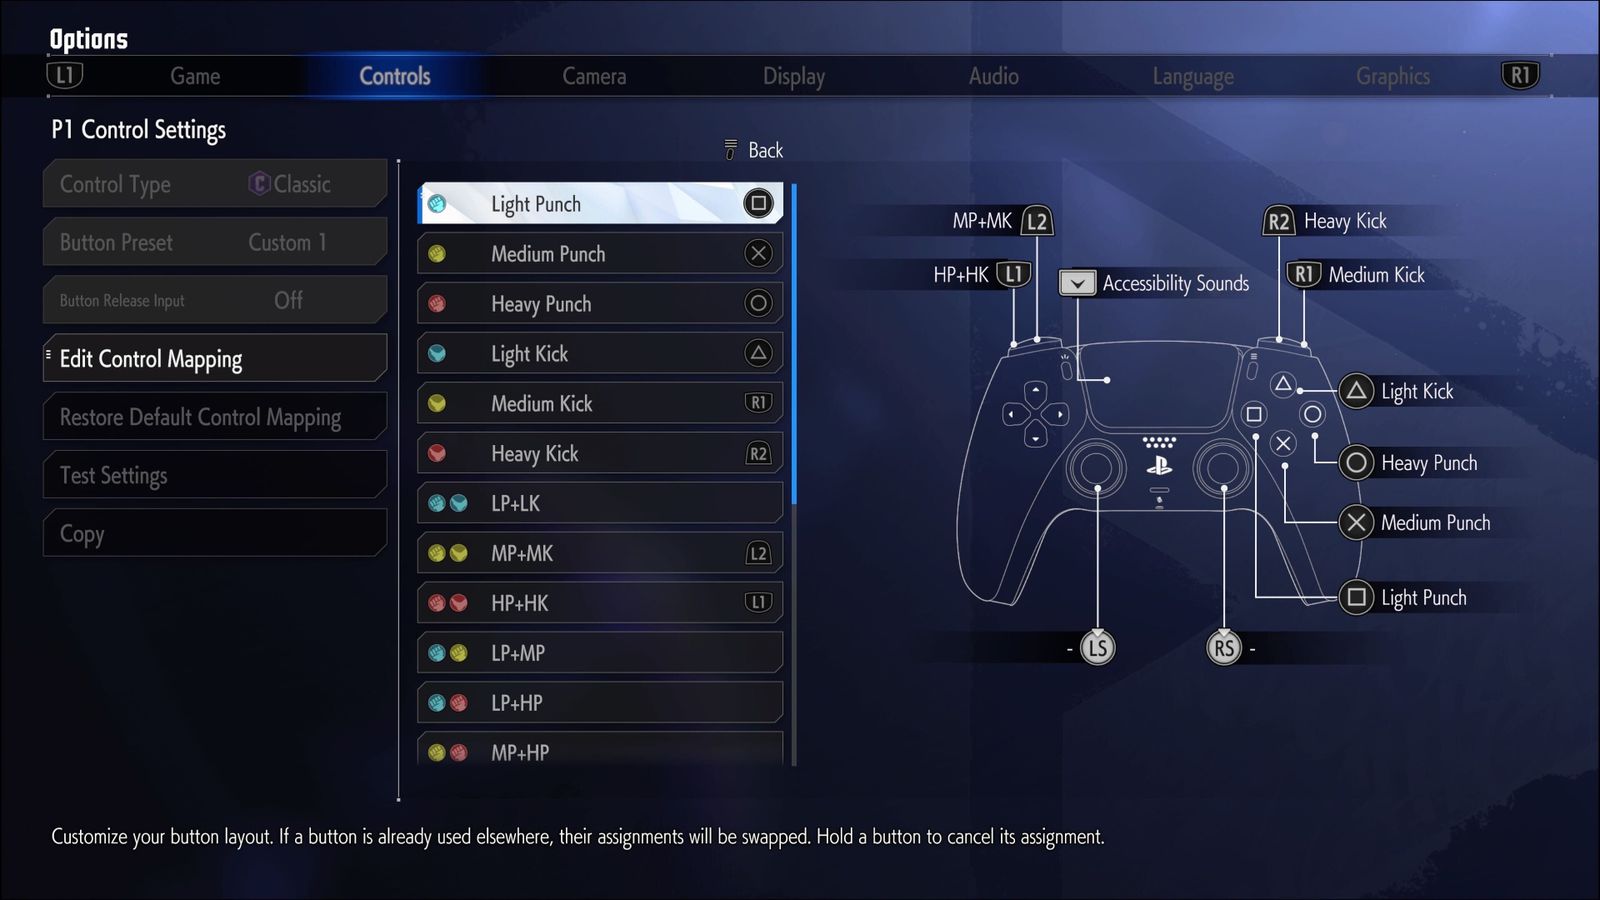 The recommended controller layout for the Classic controls in Street Fighter 6